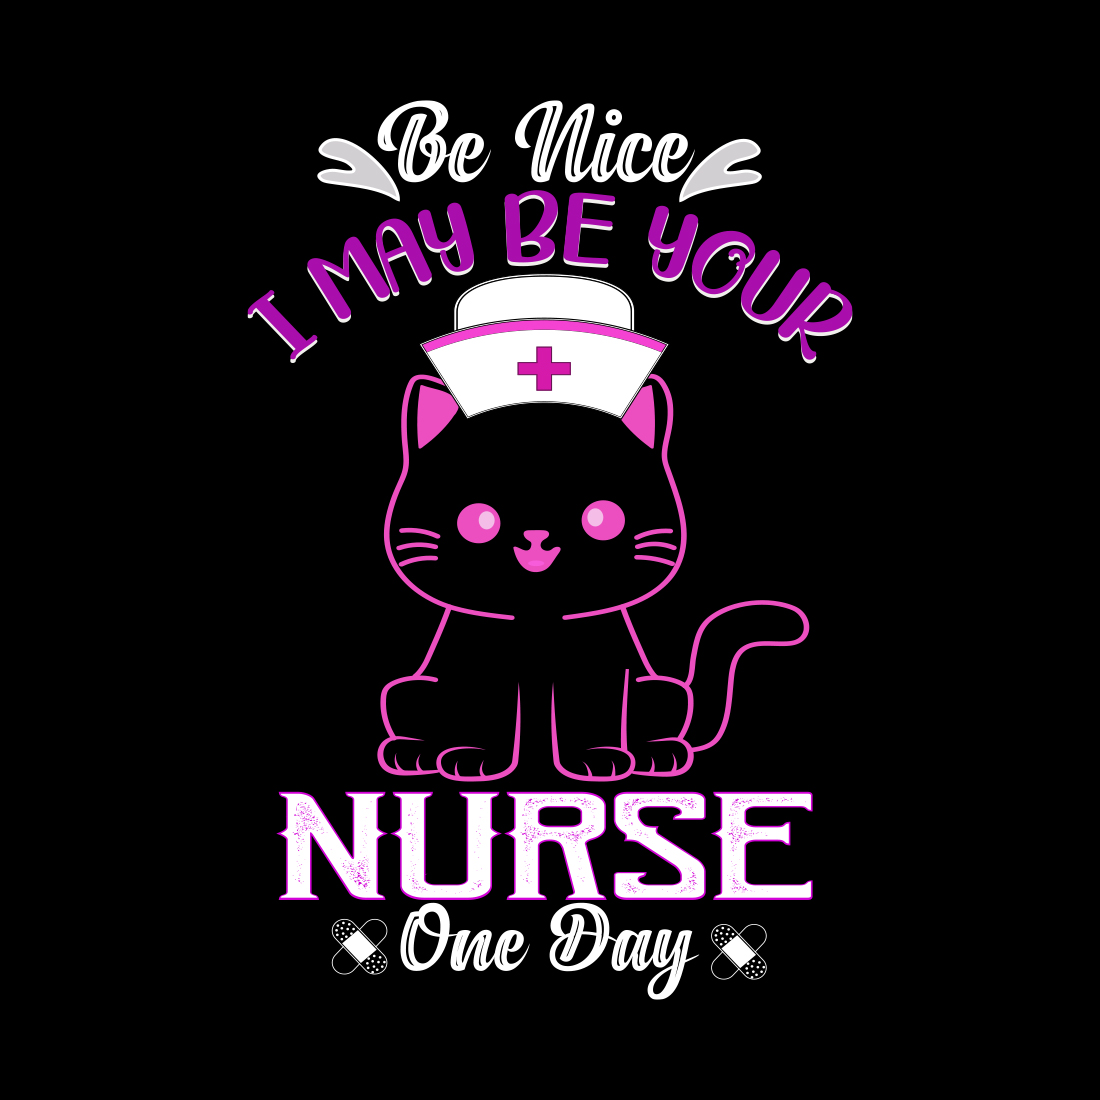 Charming image for prints on the theme of a nurse